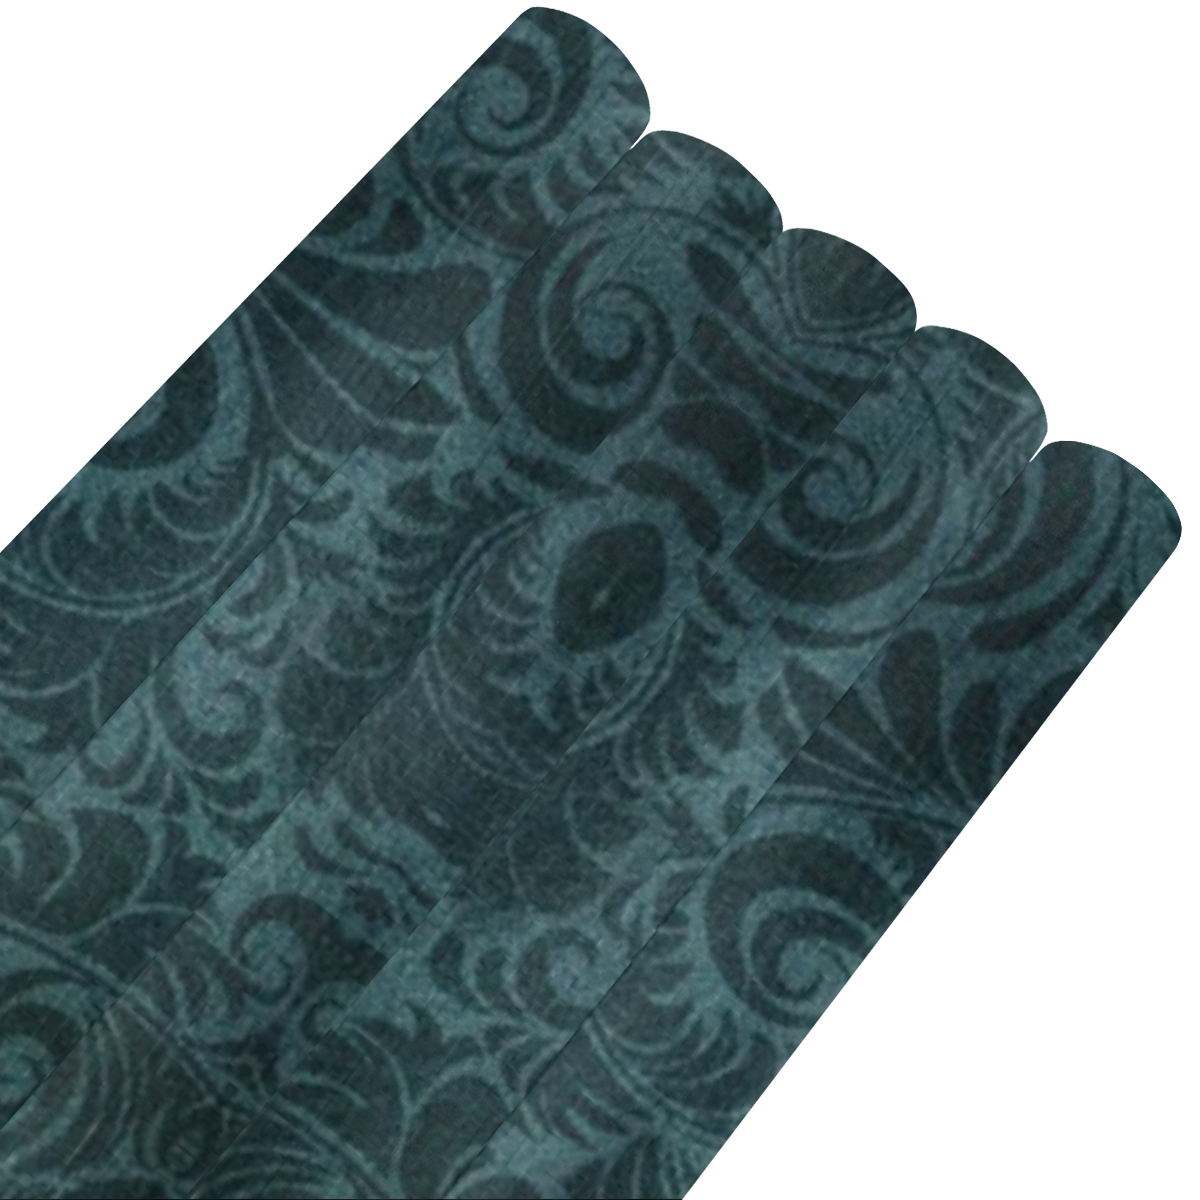 Denim with vintage floral pattern, dark green teal Gift Wrapping Paper 58"x 23" (5 Rolls)